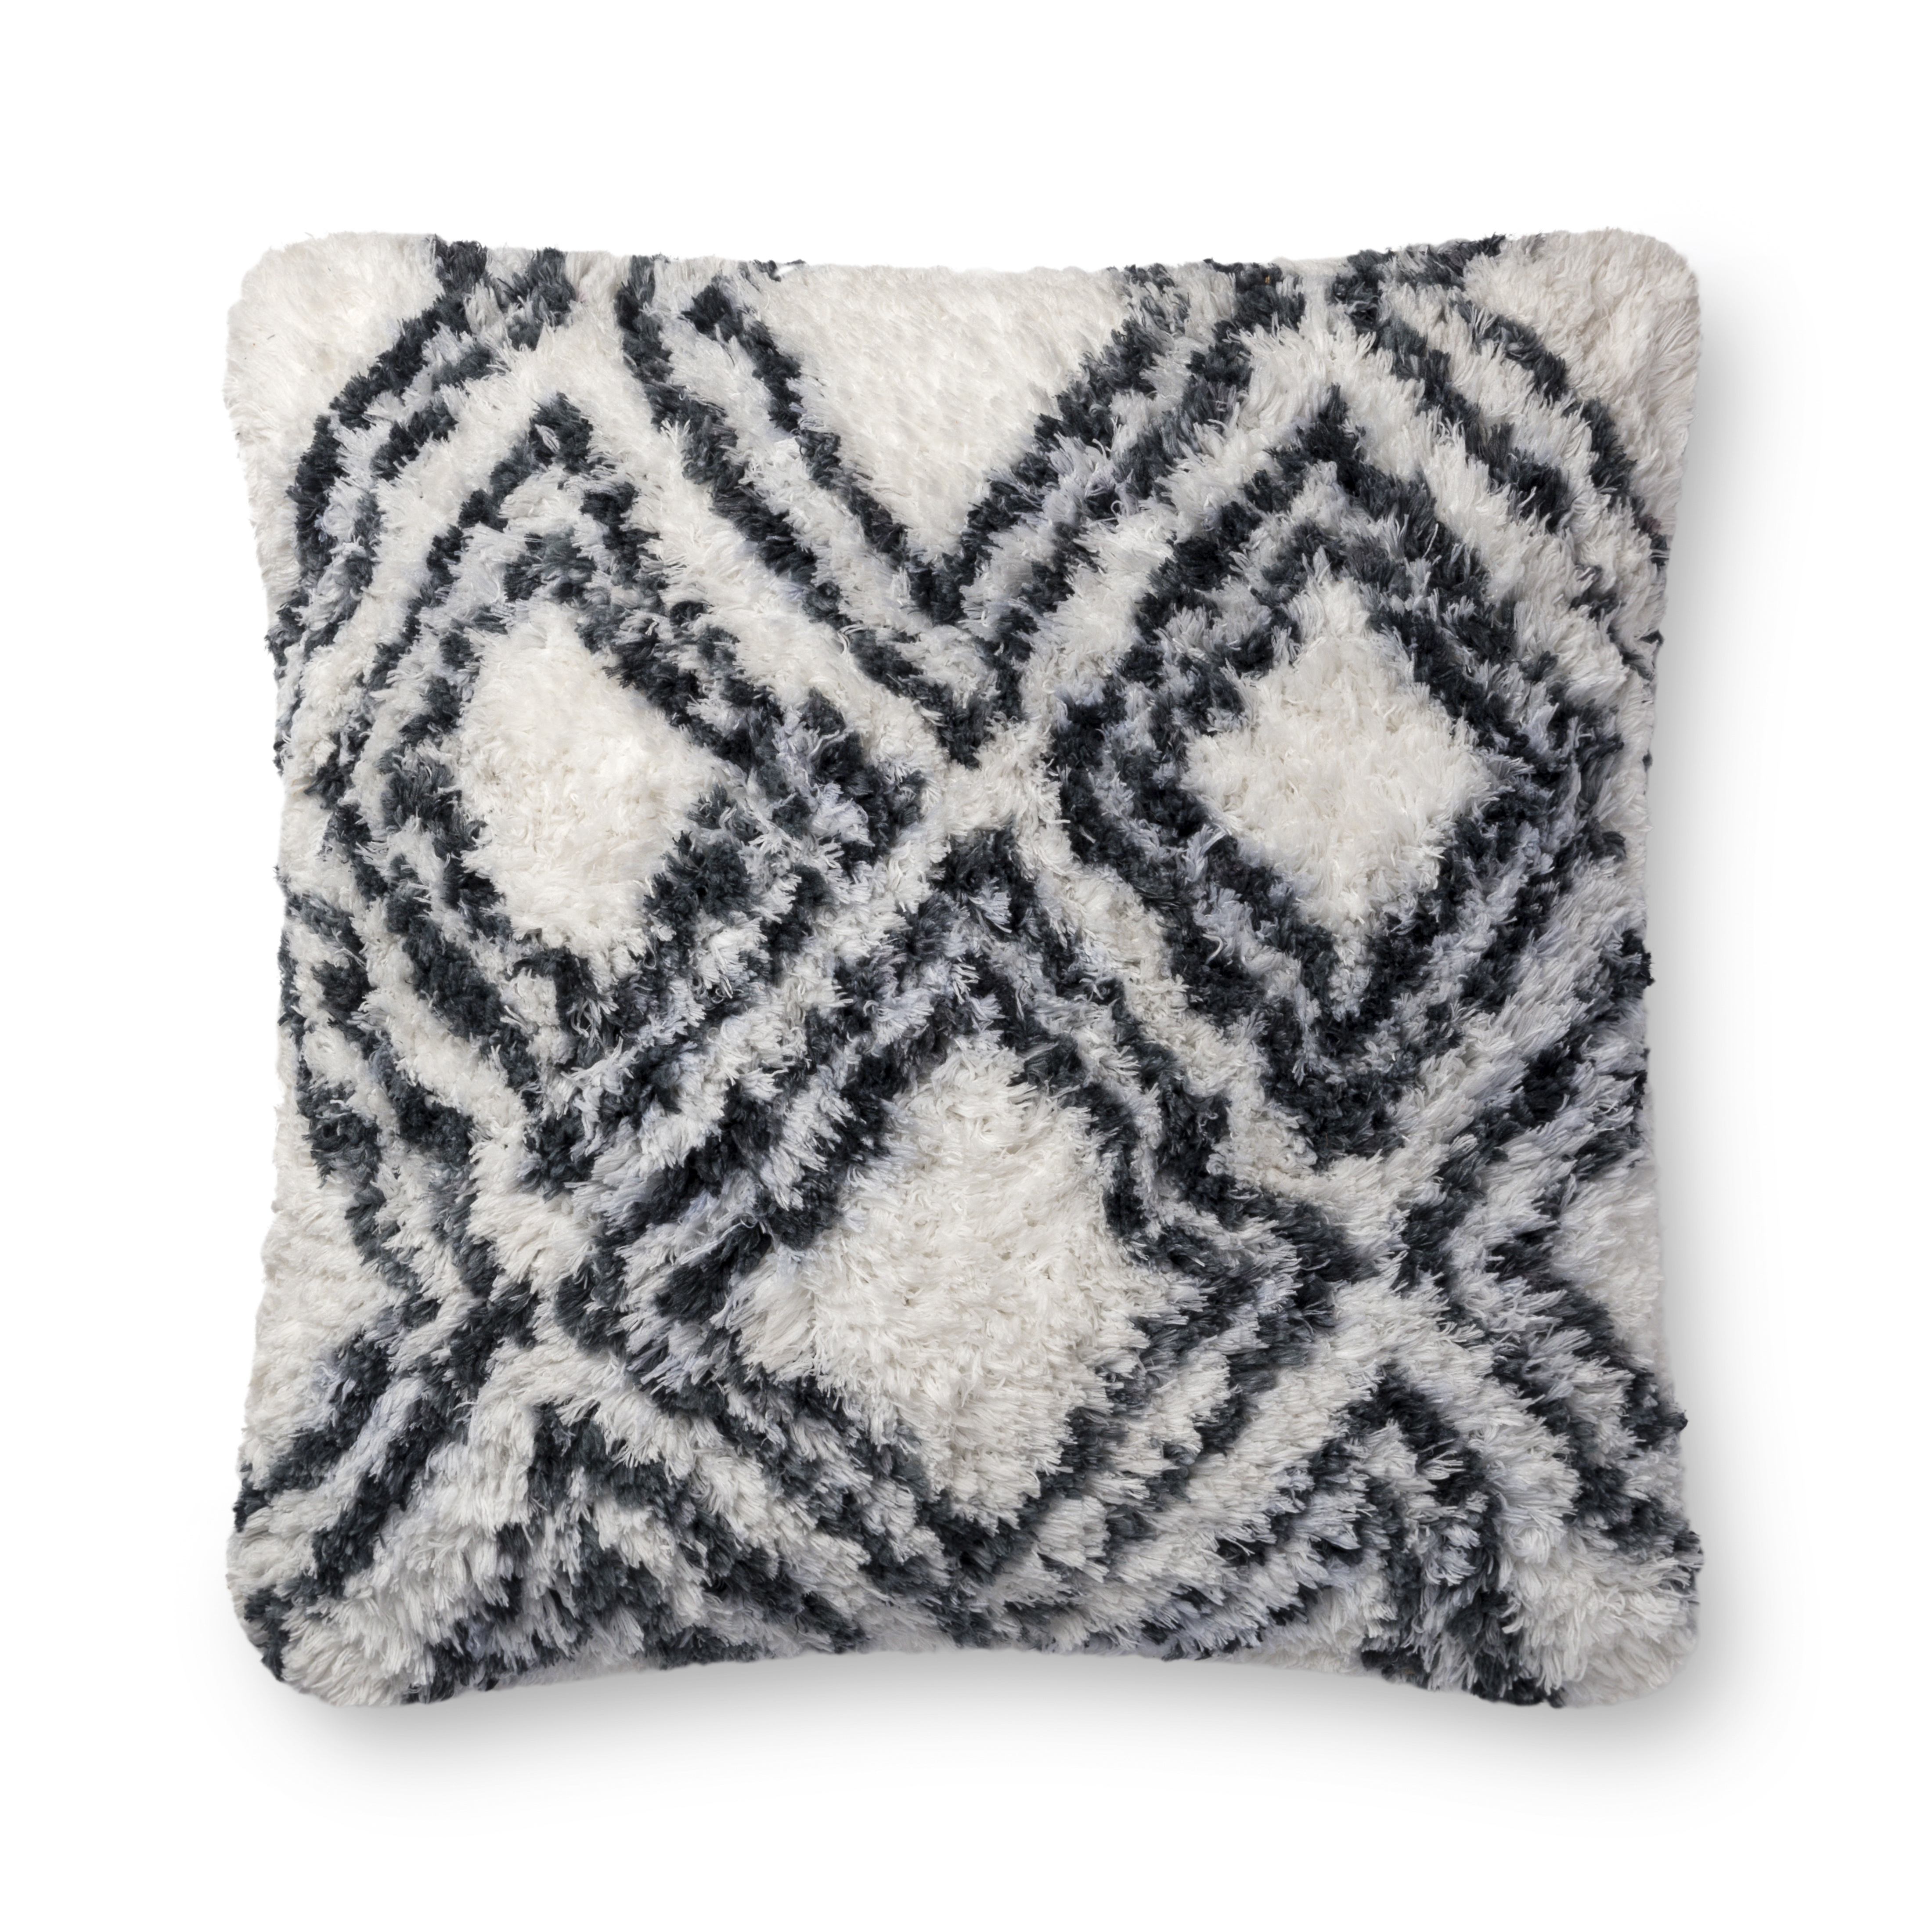 Loloi Pillows P0711 Charcoal / White 22" x 22" Cover Only - Image 0